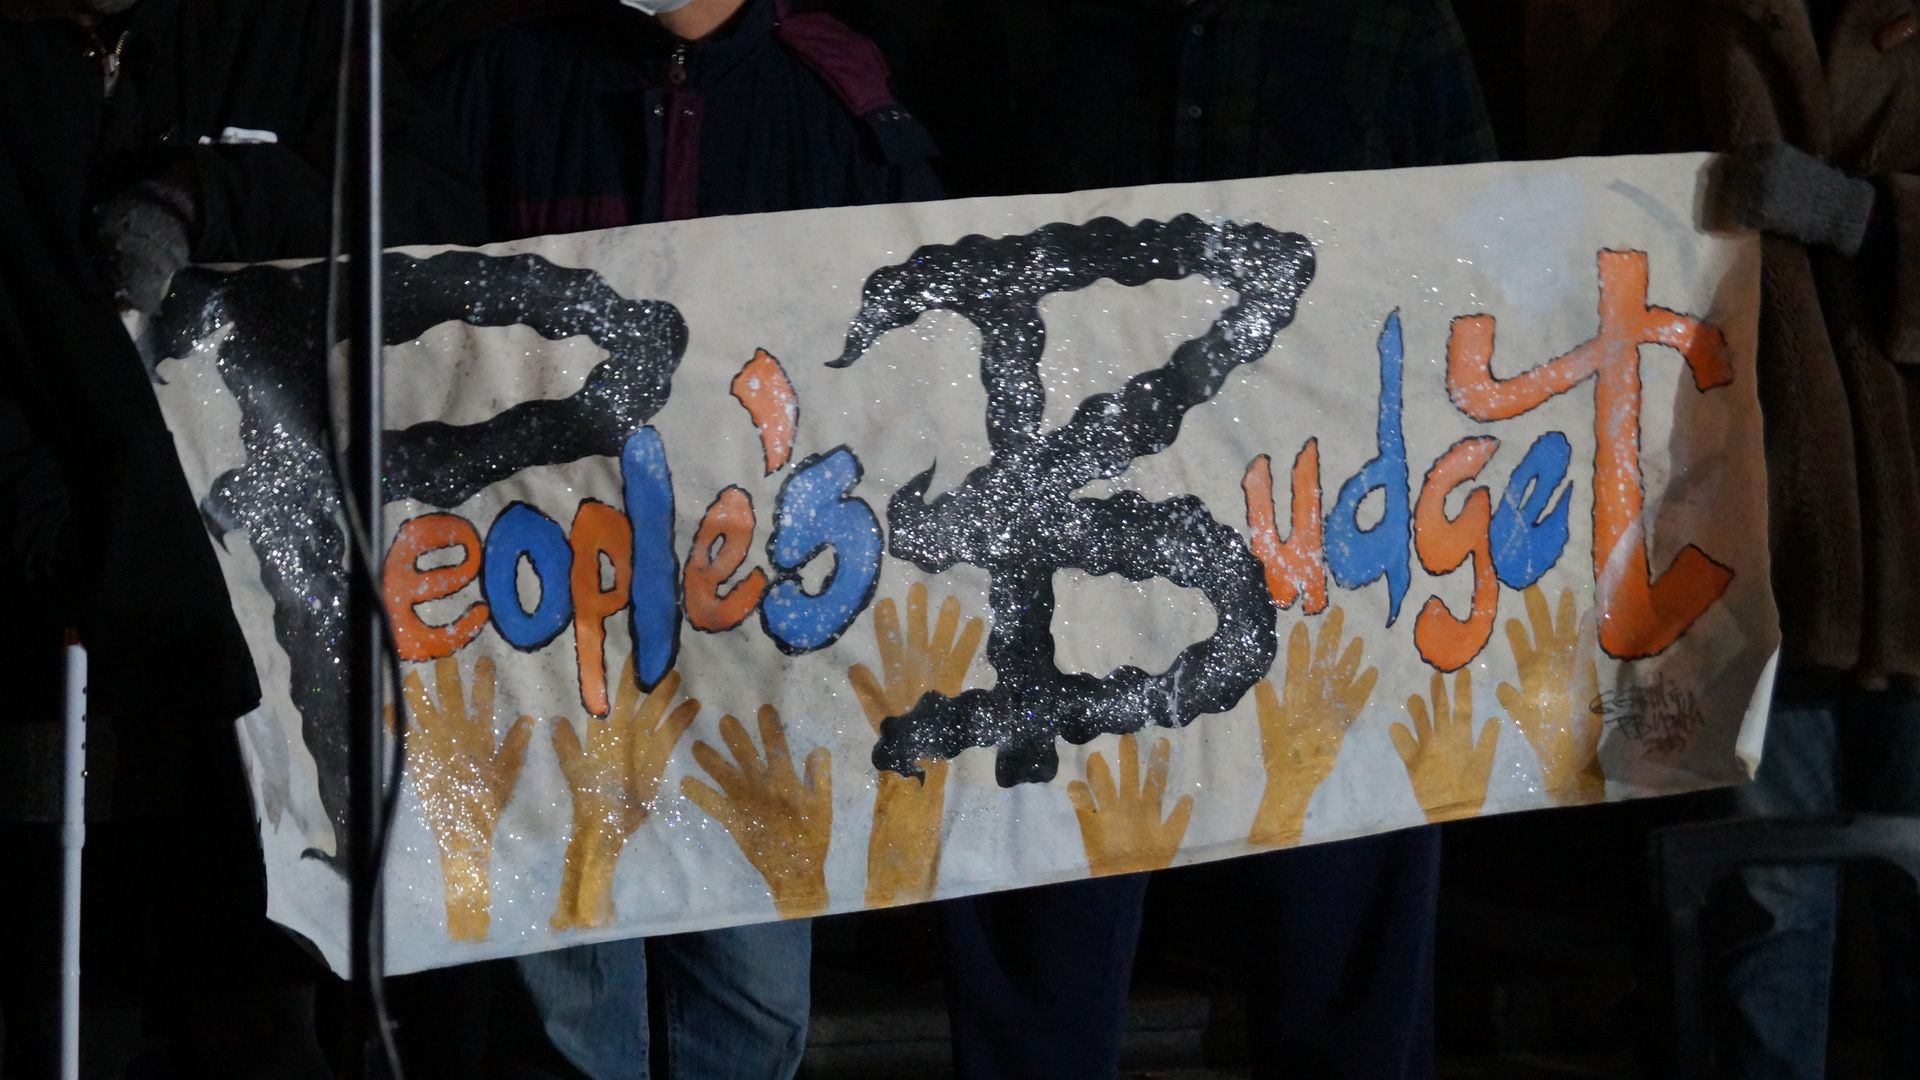 A handmade sign reading "People's Budget" held at night